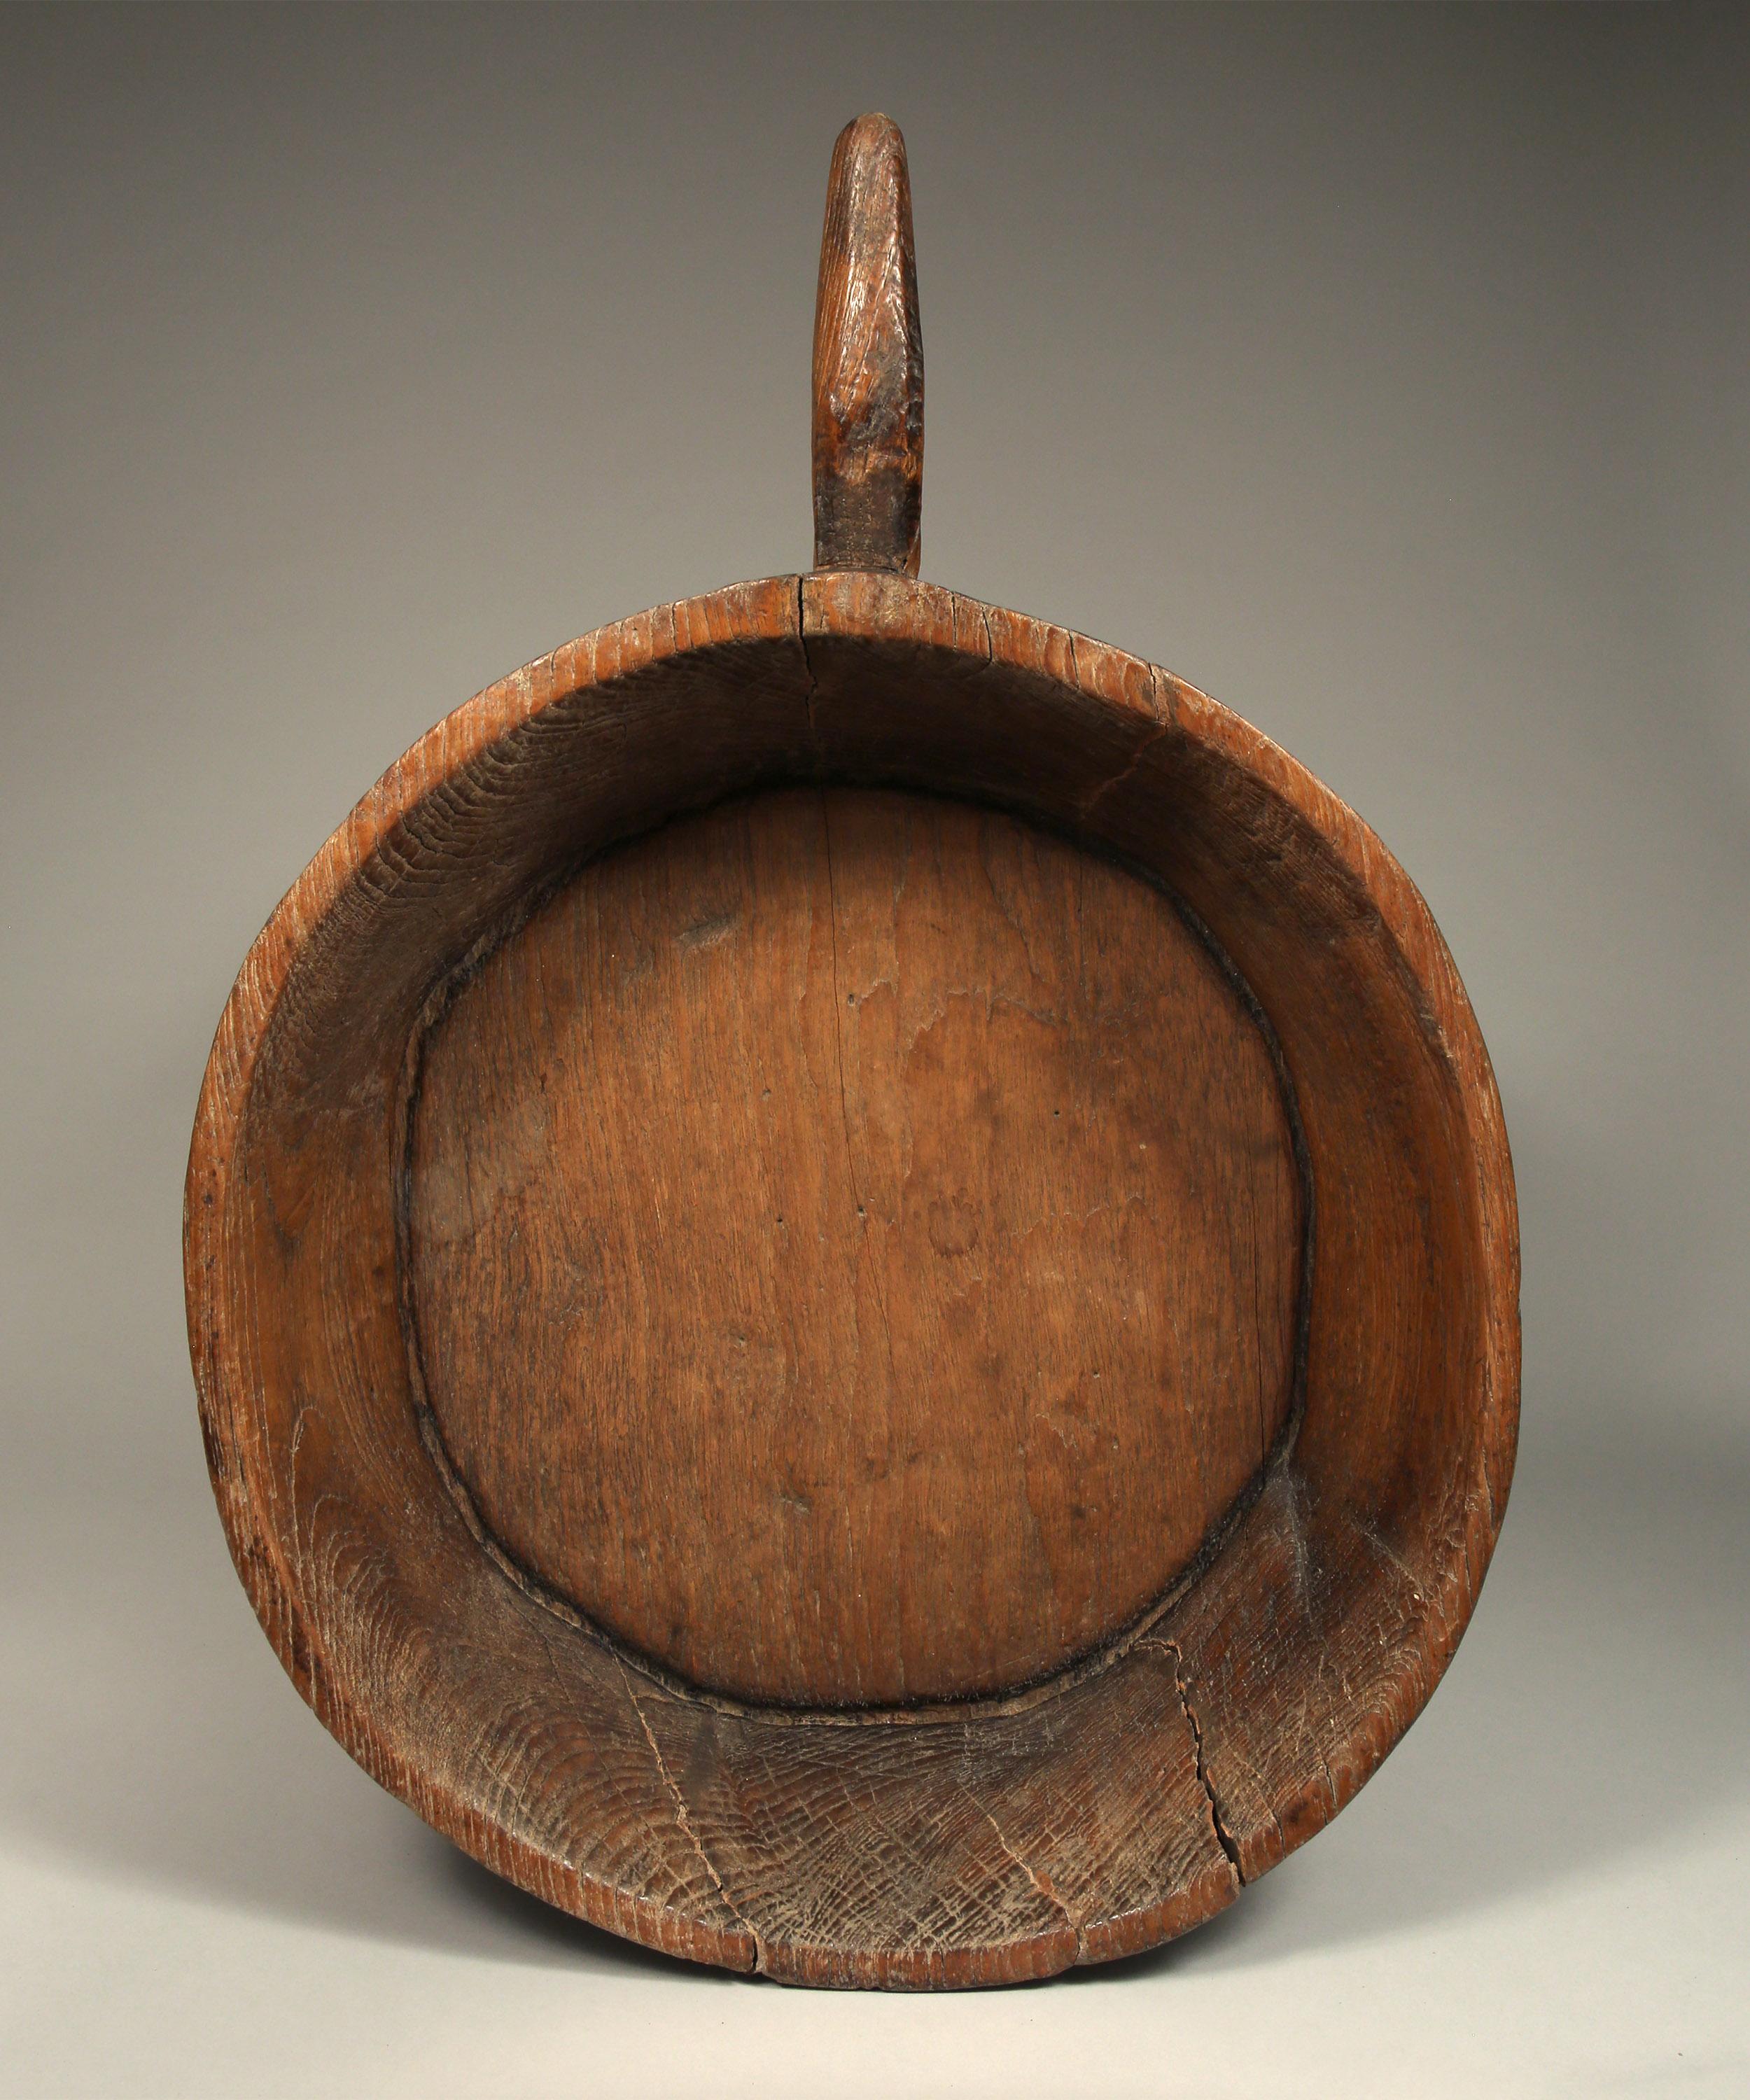 Large antique round teak bowl from Northern Thailand, early to mid-20th century.

Carved from one piece of dense teak wood including its handle.
Fine wood grain with rustic patina from village usage.
      